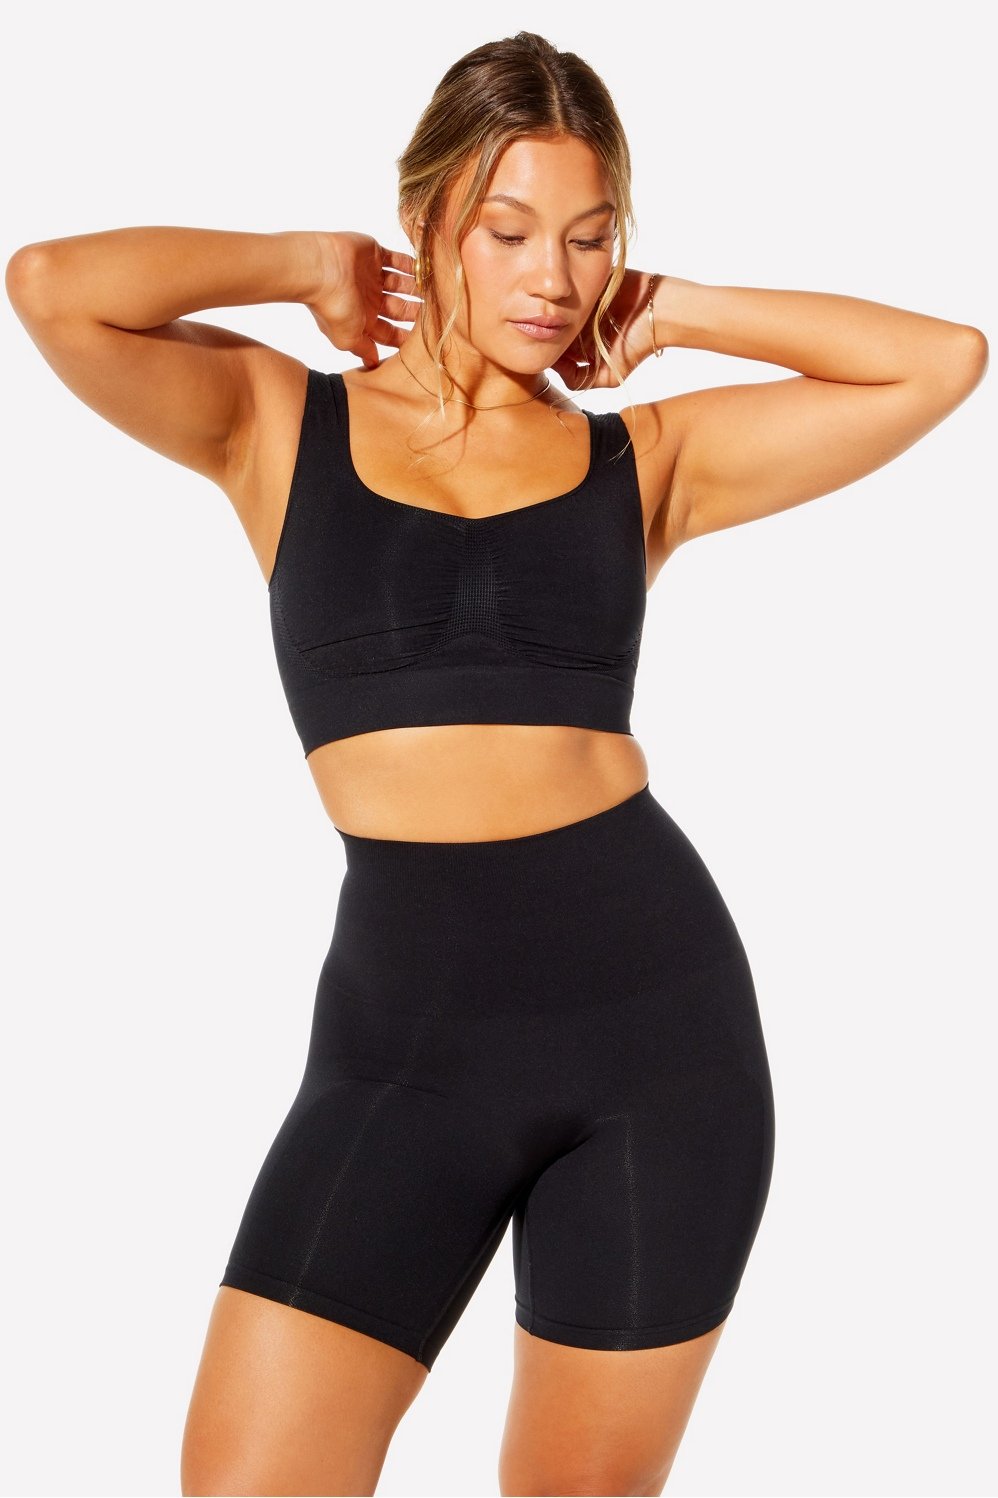 The Smooth Moves Bralette & Booty Lift Shorts Set (nude or black